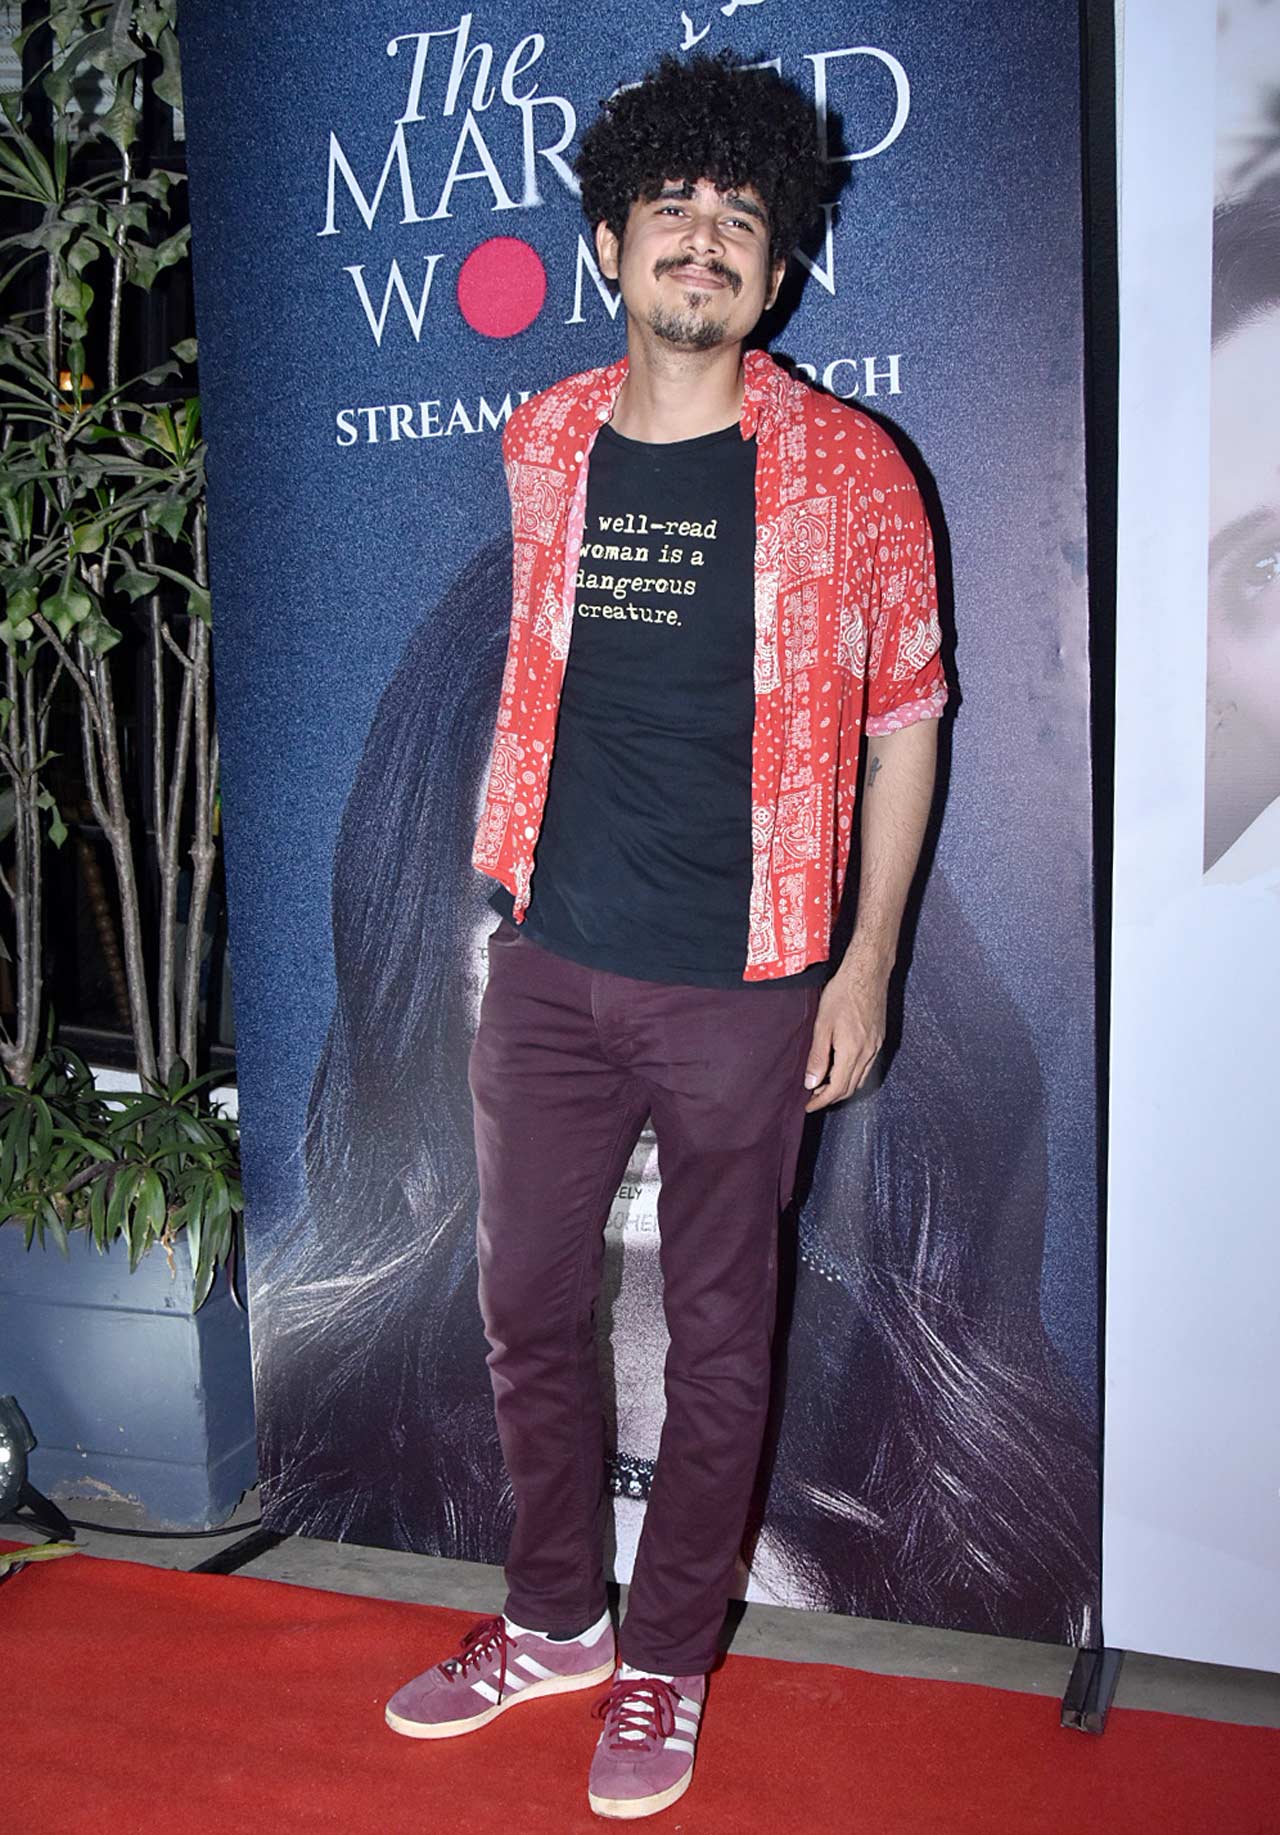 The Married Woman also stars Imaad Shah, Ayesha Raza, Rahul Vohra, Divya Seth Shah, Nadira Babbar and Suhaas Ahuja in key roles. It will stream on ALT Balaji and Zee5 from March 8.
In picture: Imaad Shah, who also plays a pivotal role in the show, sported a slogan tee, paired with a printed shirt and chinos.